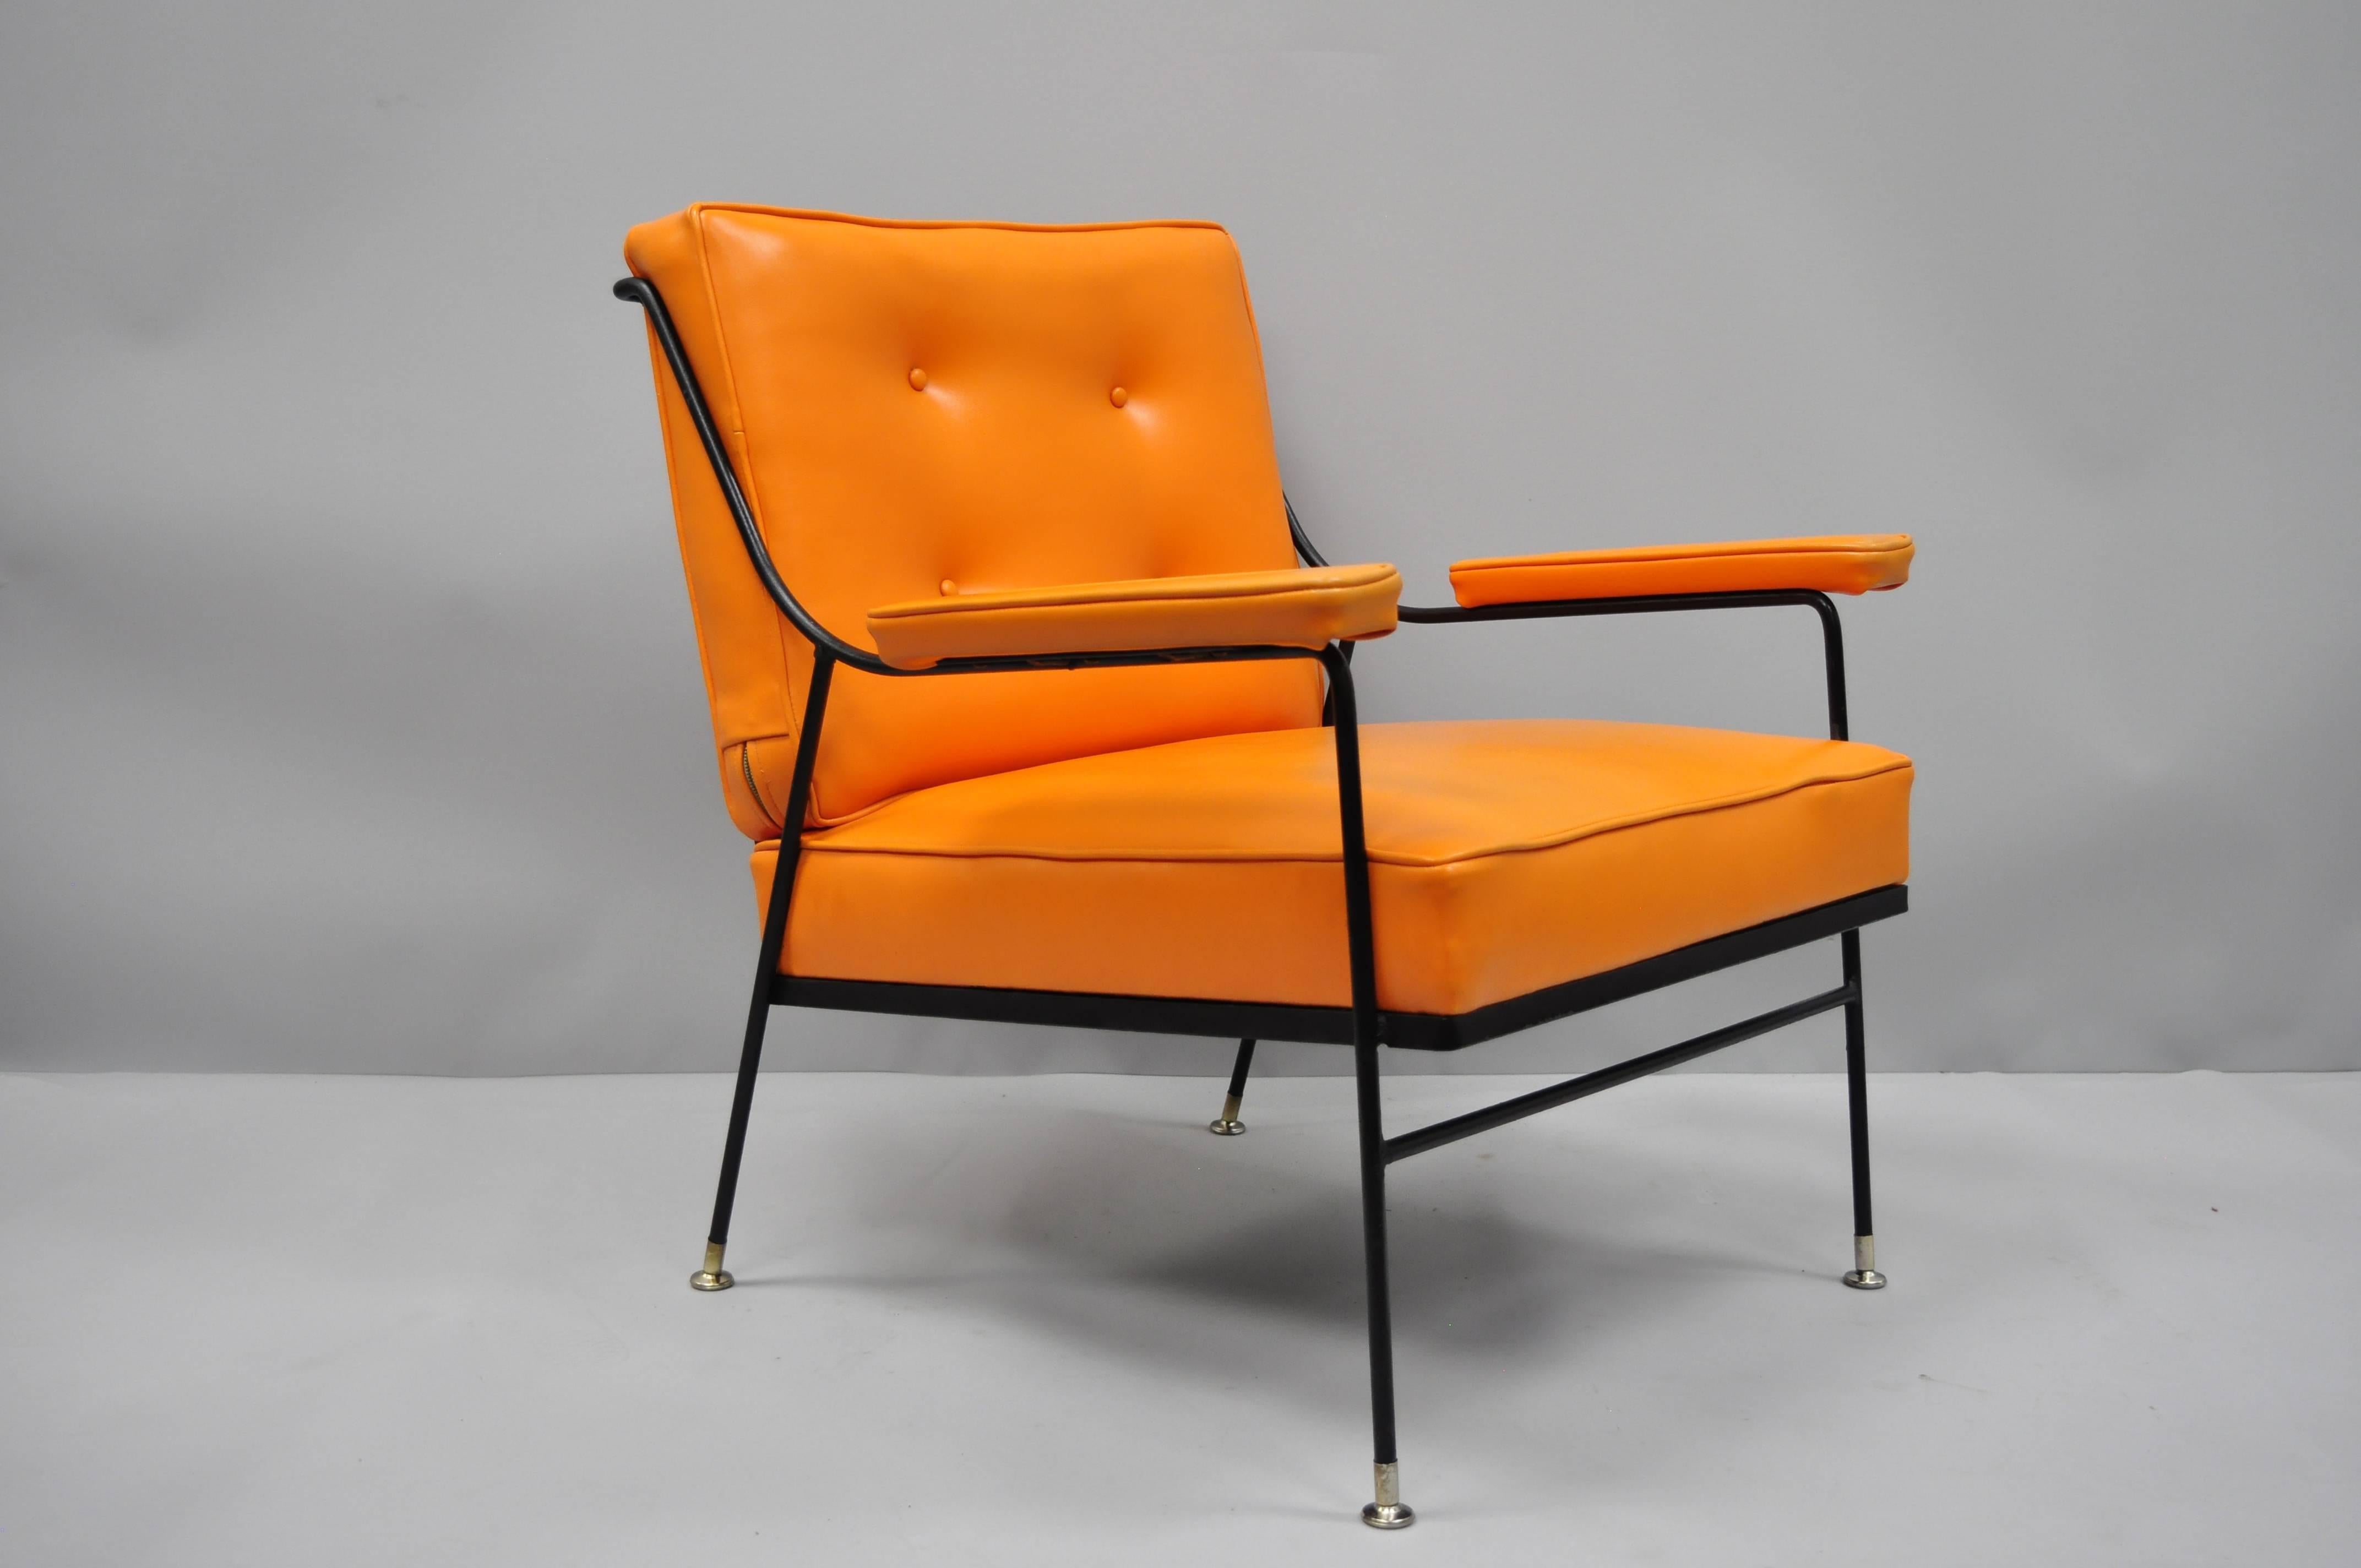 Pair of Wrought Iron & Orange Vinyl Lounge Chairs attr Milo Baughman for Pacific 6